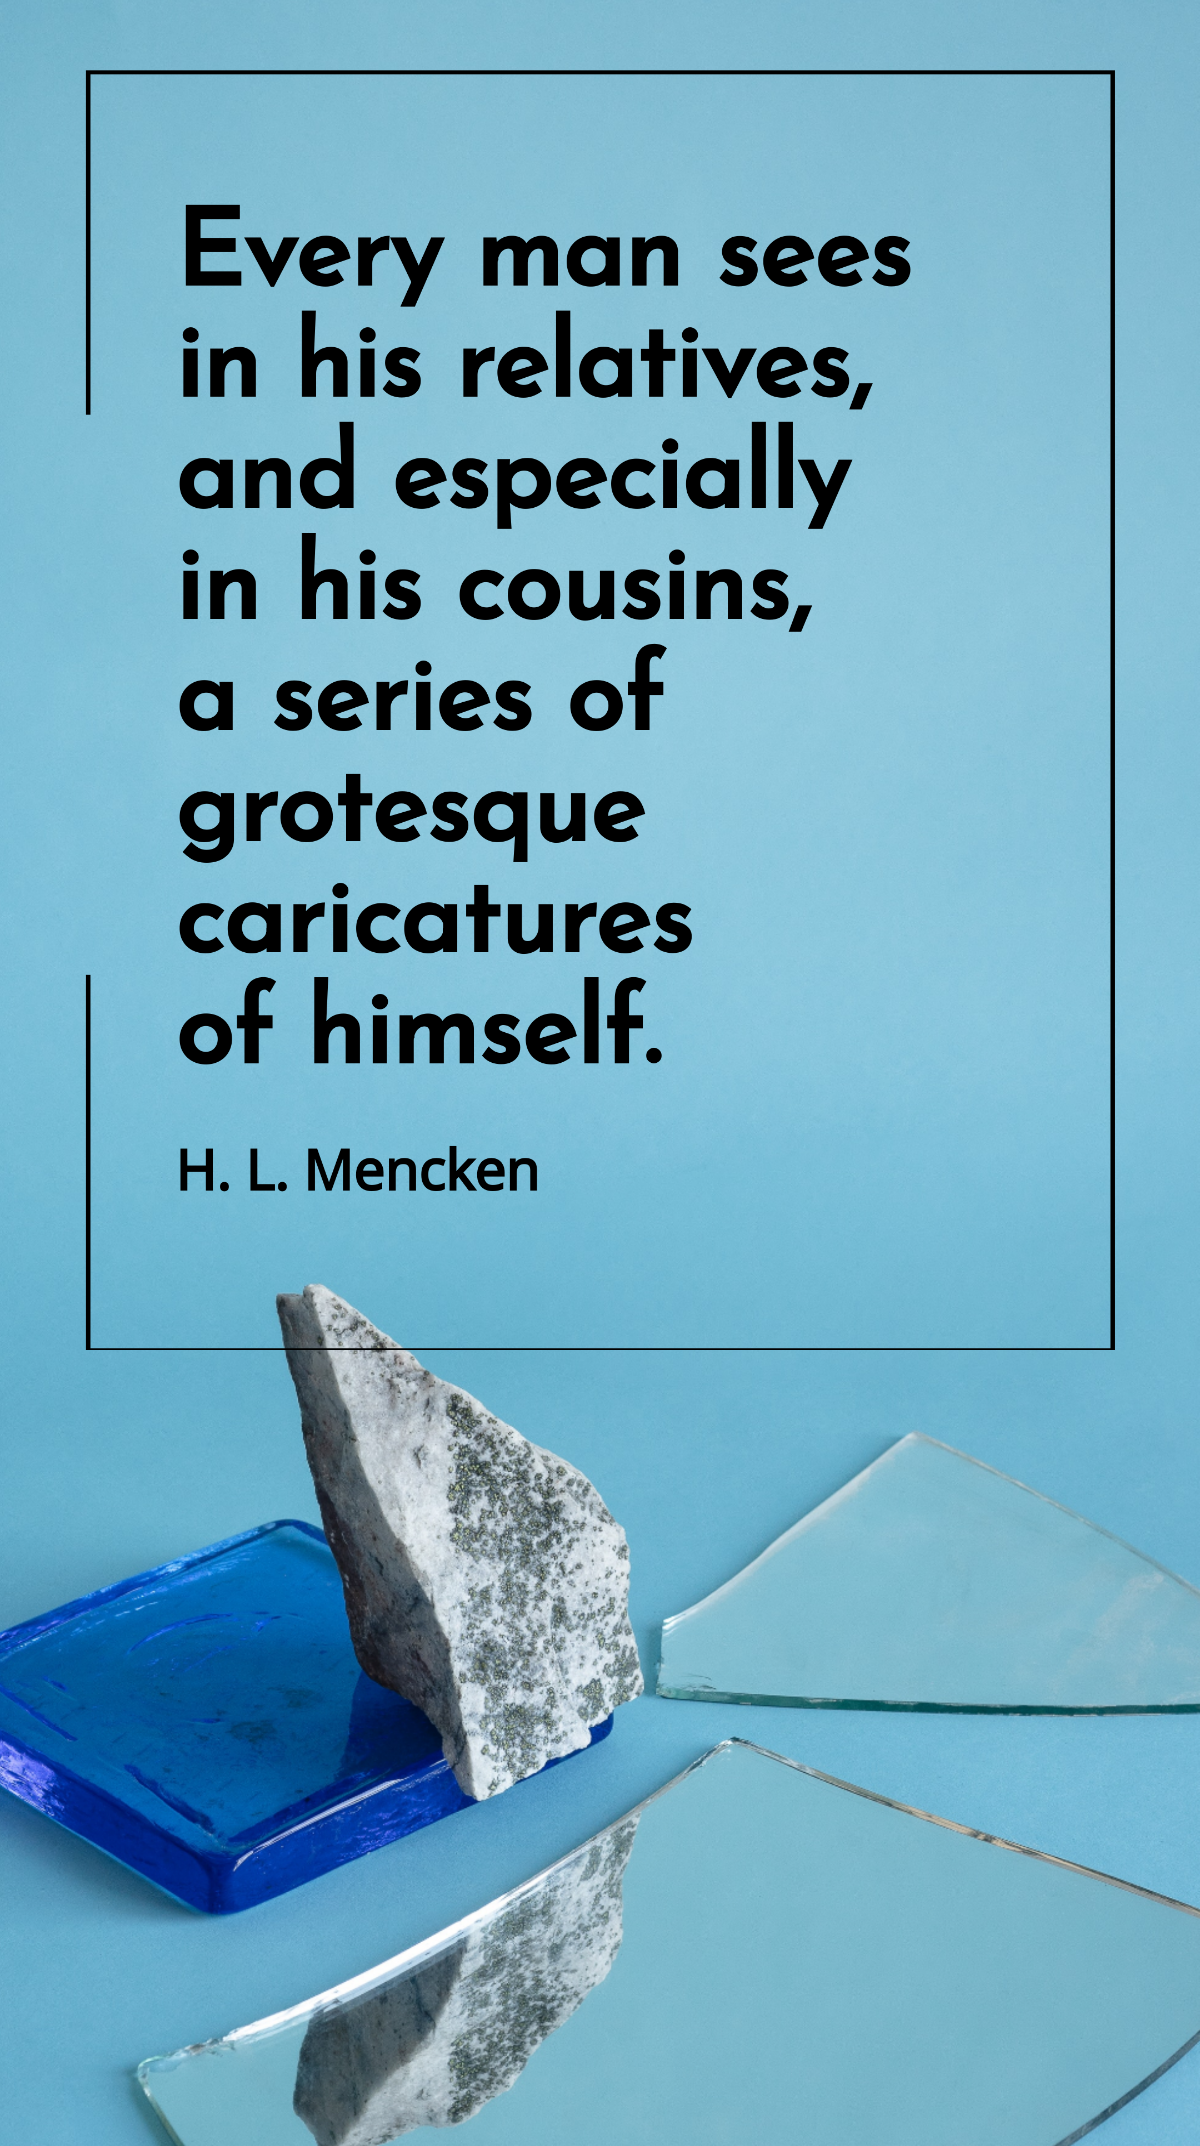 H. L. Mencken - Every man sees in his relatives, and especially in his cousins, a series of grotesque caricatures of himself. Template